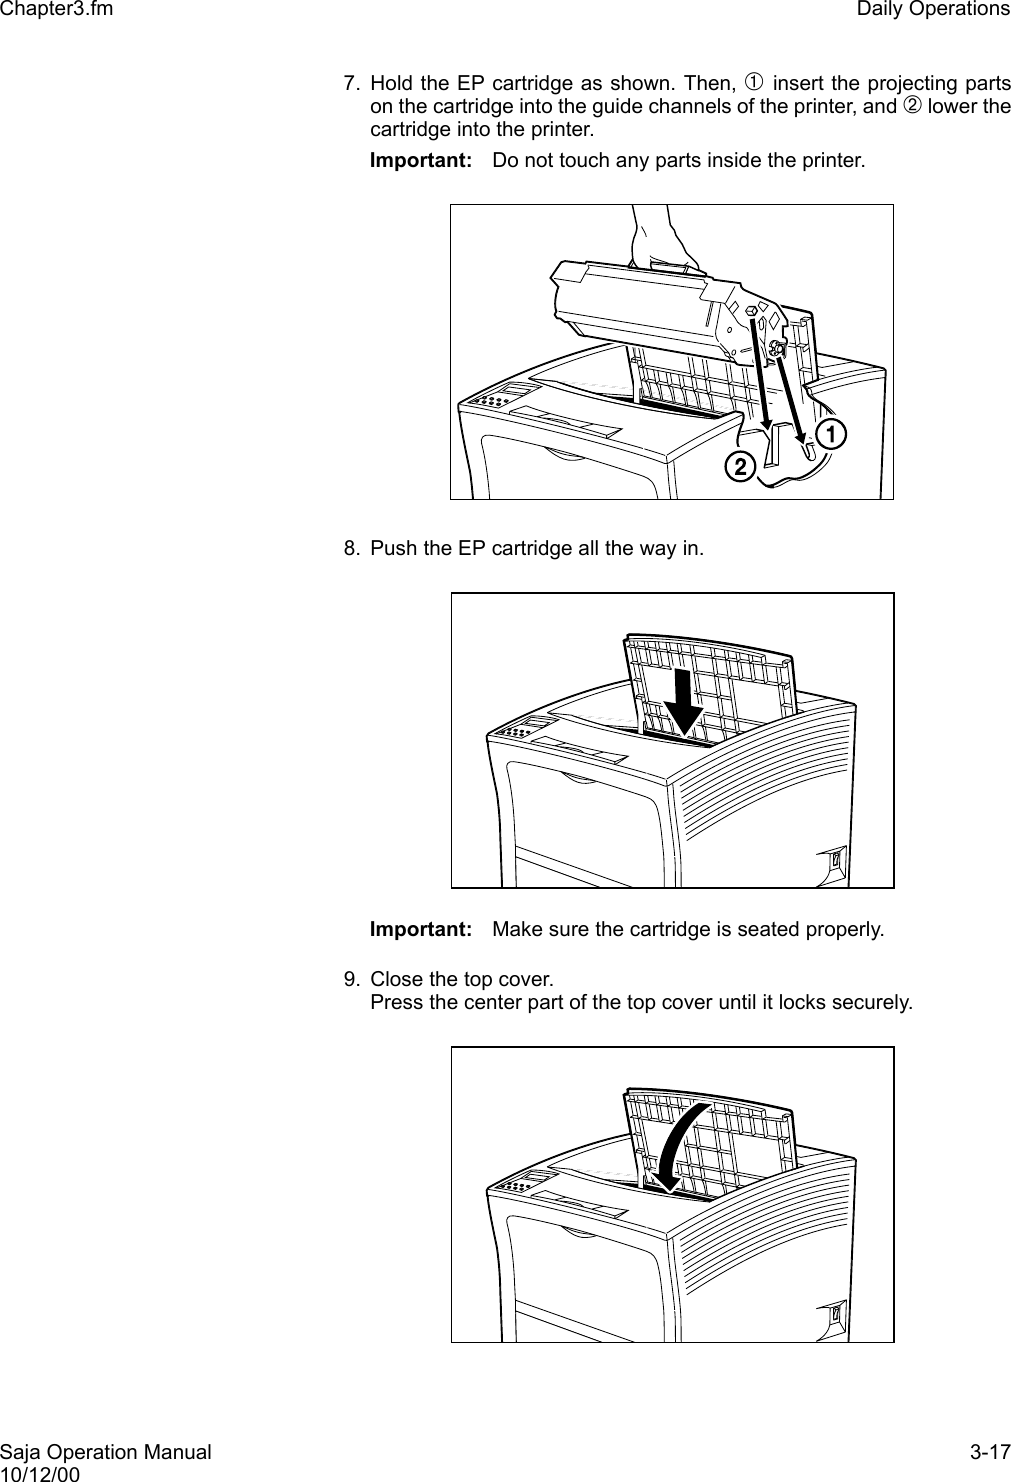 Saja Operation Manual 3-1710/12/00Chapter3.fm Daily Operations7. Hold the EP cartridge as shown. Then, ➀ insert the projecting partson the cartridge into the guide channels of the printer, and ➁ lower thecartridge into the printer. Important: Do not touch any parts inside the printer. 8. Push the EP cartridge all the way in. Important: Make sure the cartridge is seated properly. 9. Close the top cover.Press the center part of the top cover until it locks securely.